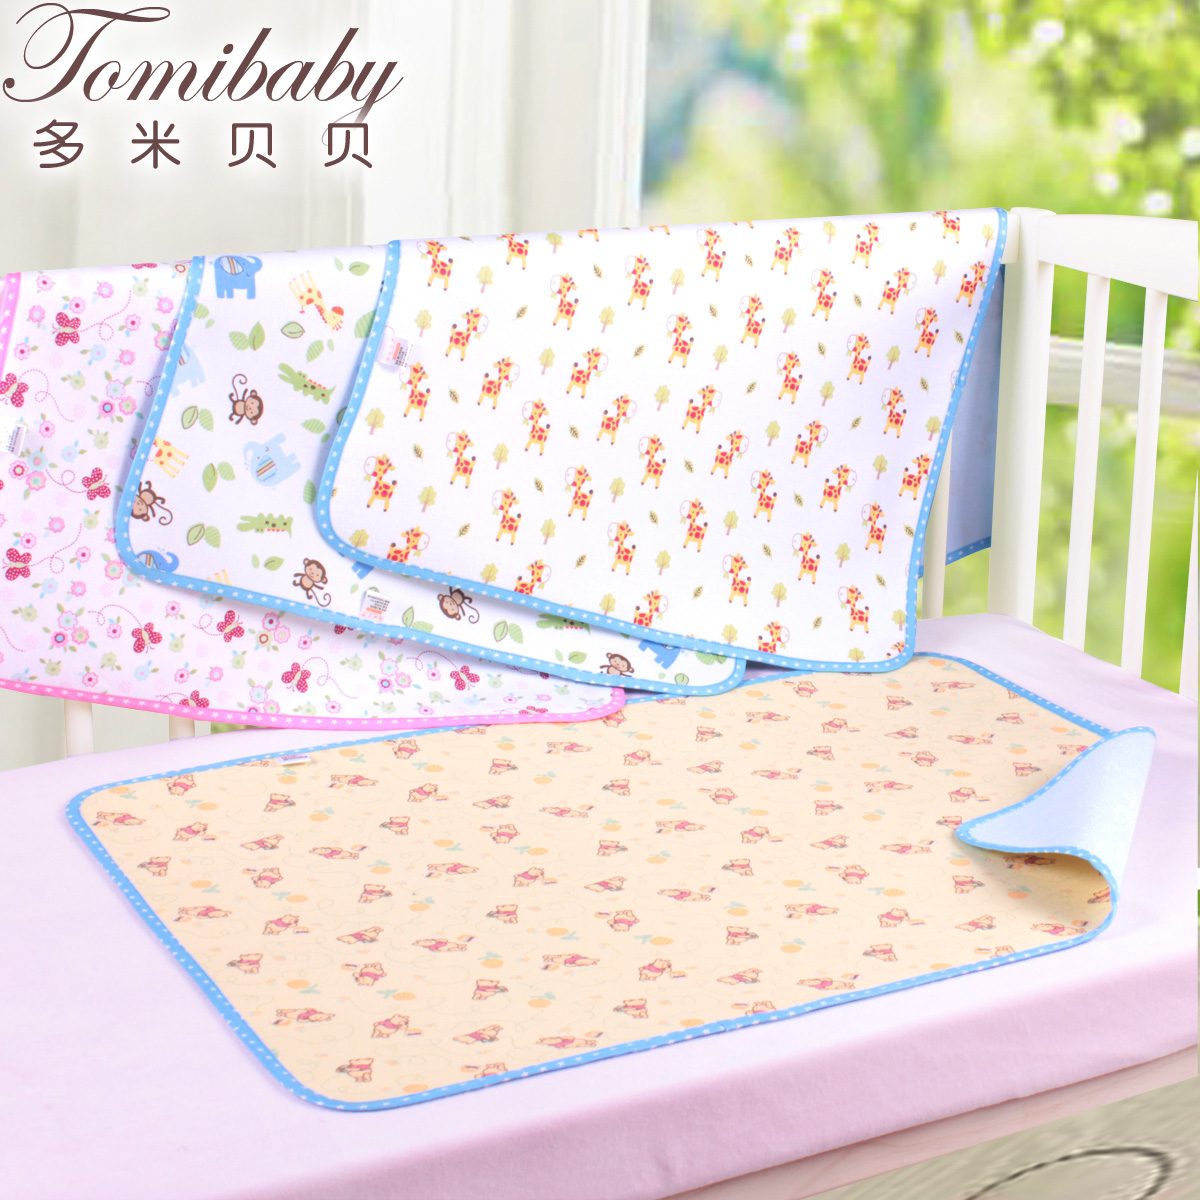 newborn baby bed sheets pictures